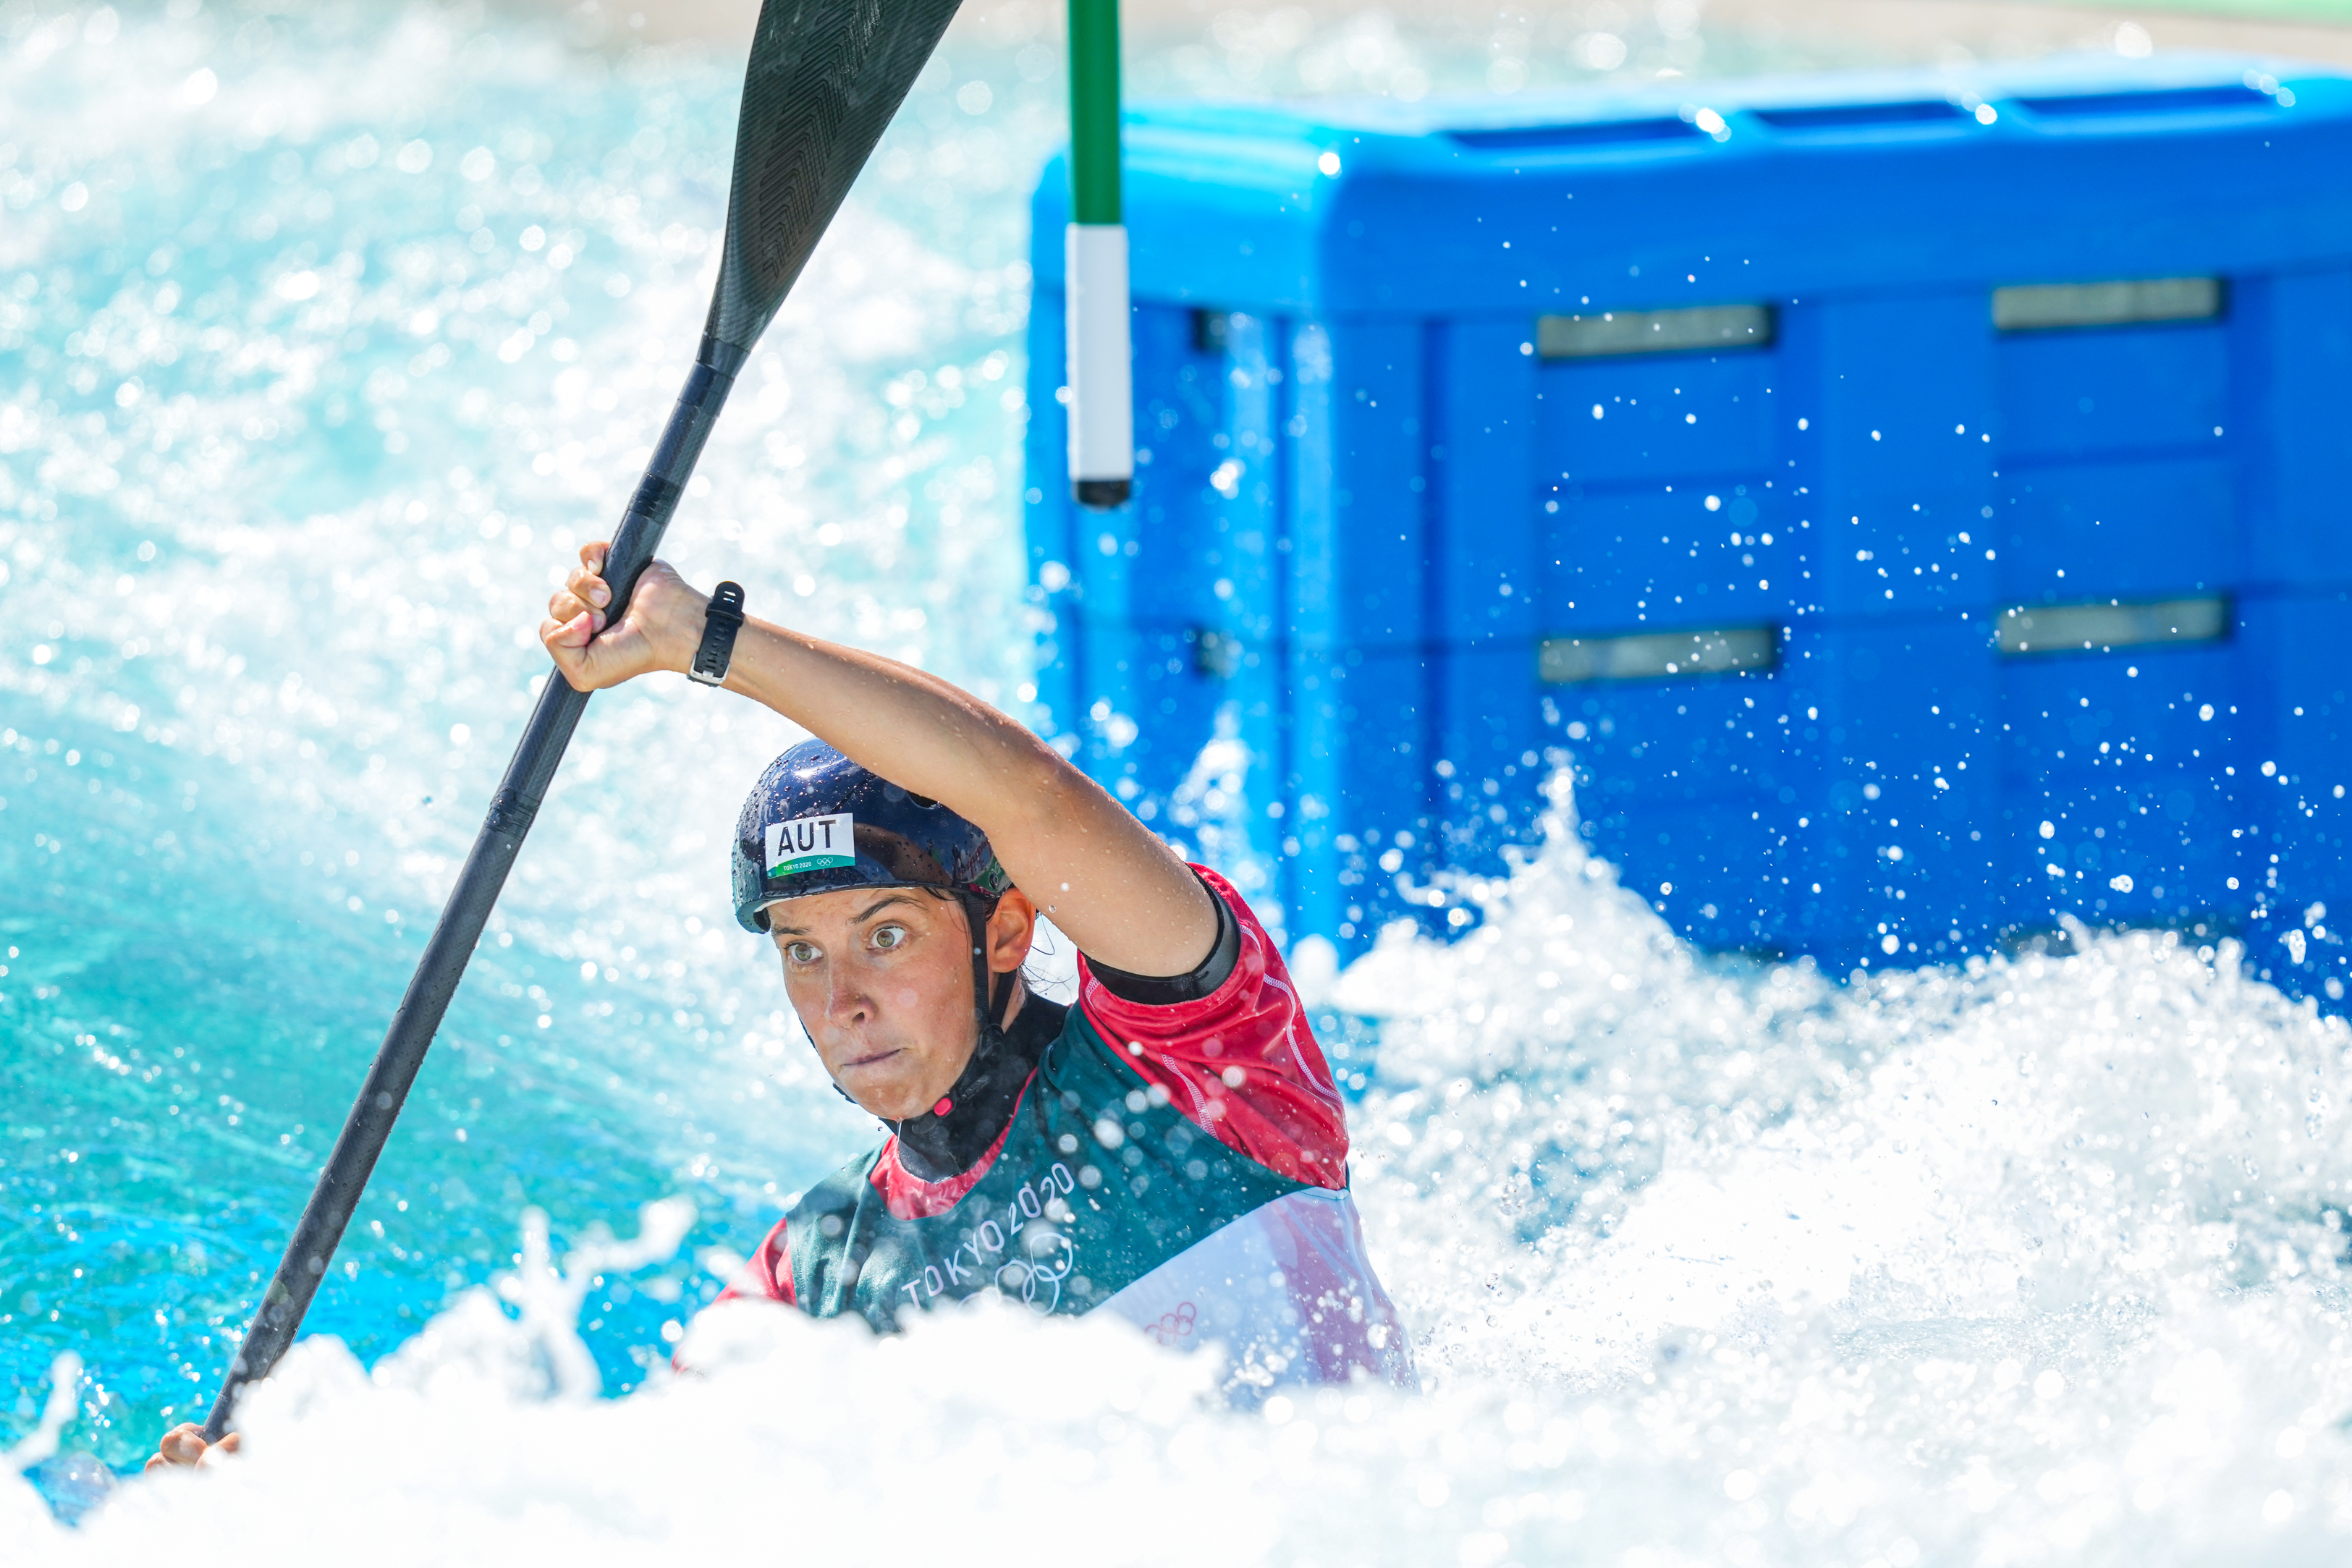 Viktoria Wolffhardt of Team Austria competes on Women’s Kayak Semi-final during the Tokyo 2020 Olympic Games at the Kasai Canoe Slalom Centre on July 27, 2021 in Tokyo, Japan